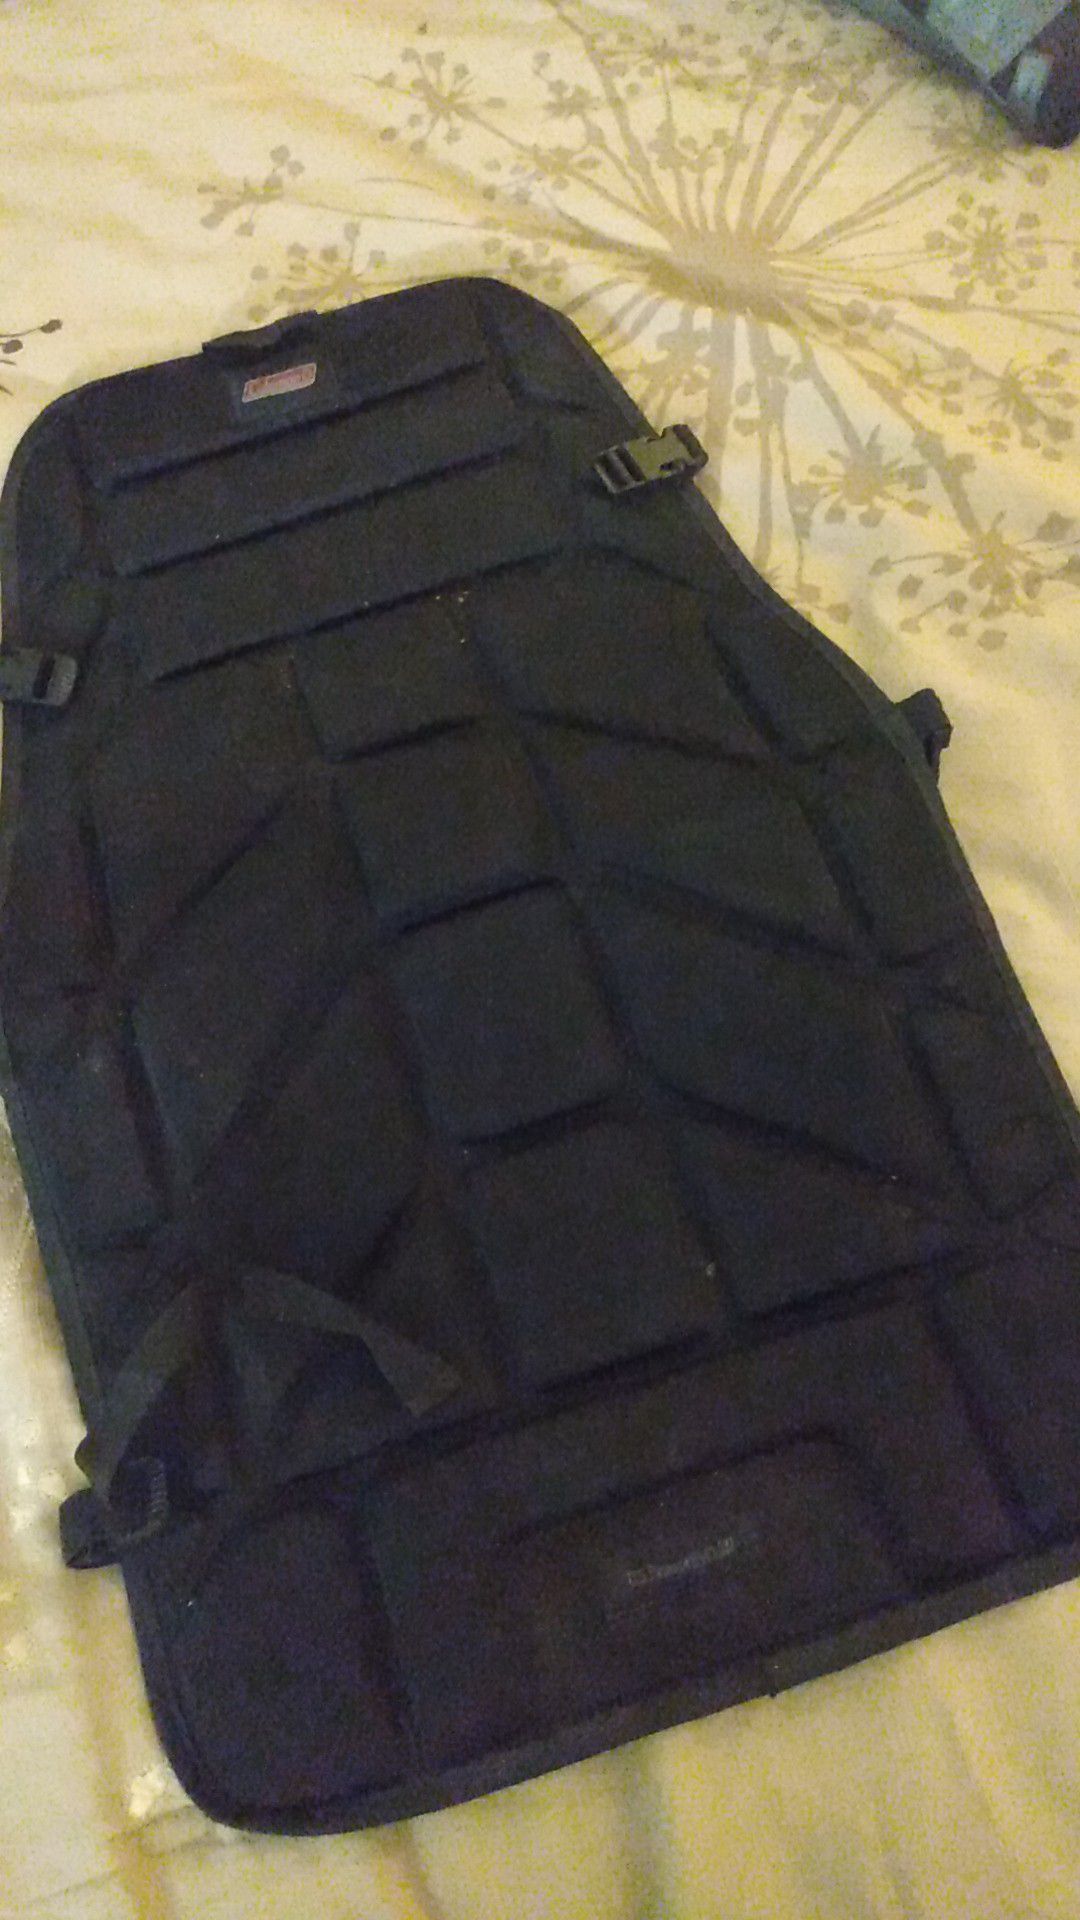 Coleman motorcycle seat pad.. barely used... $5